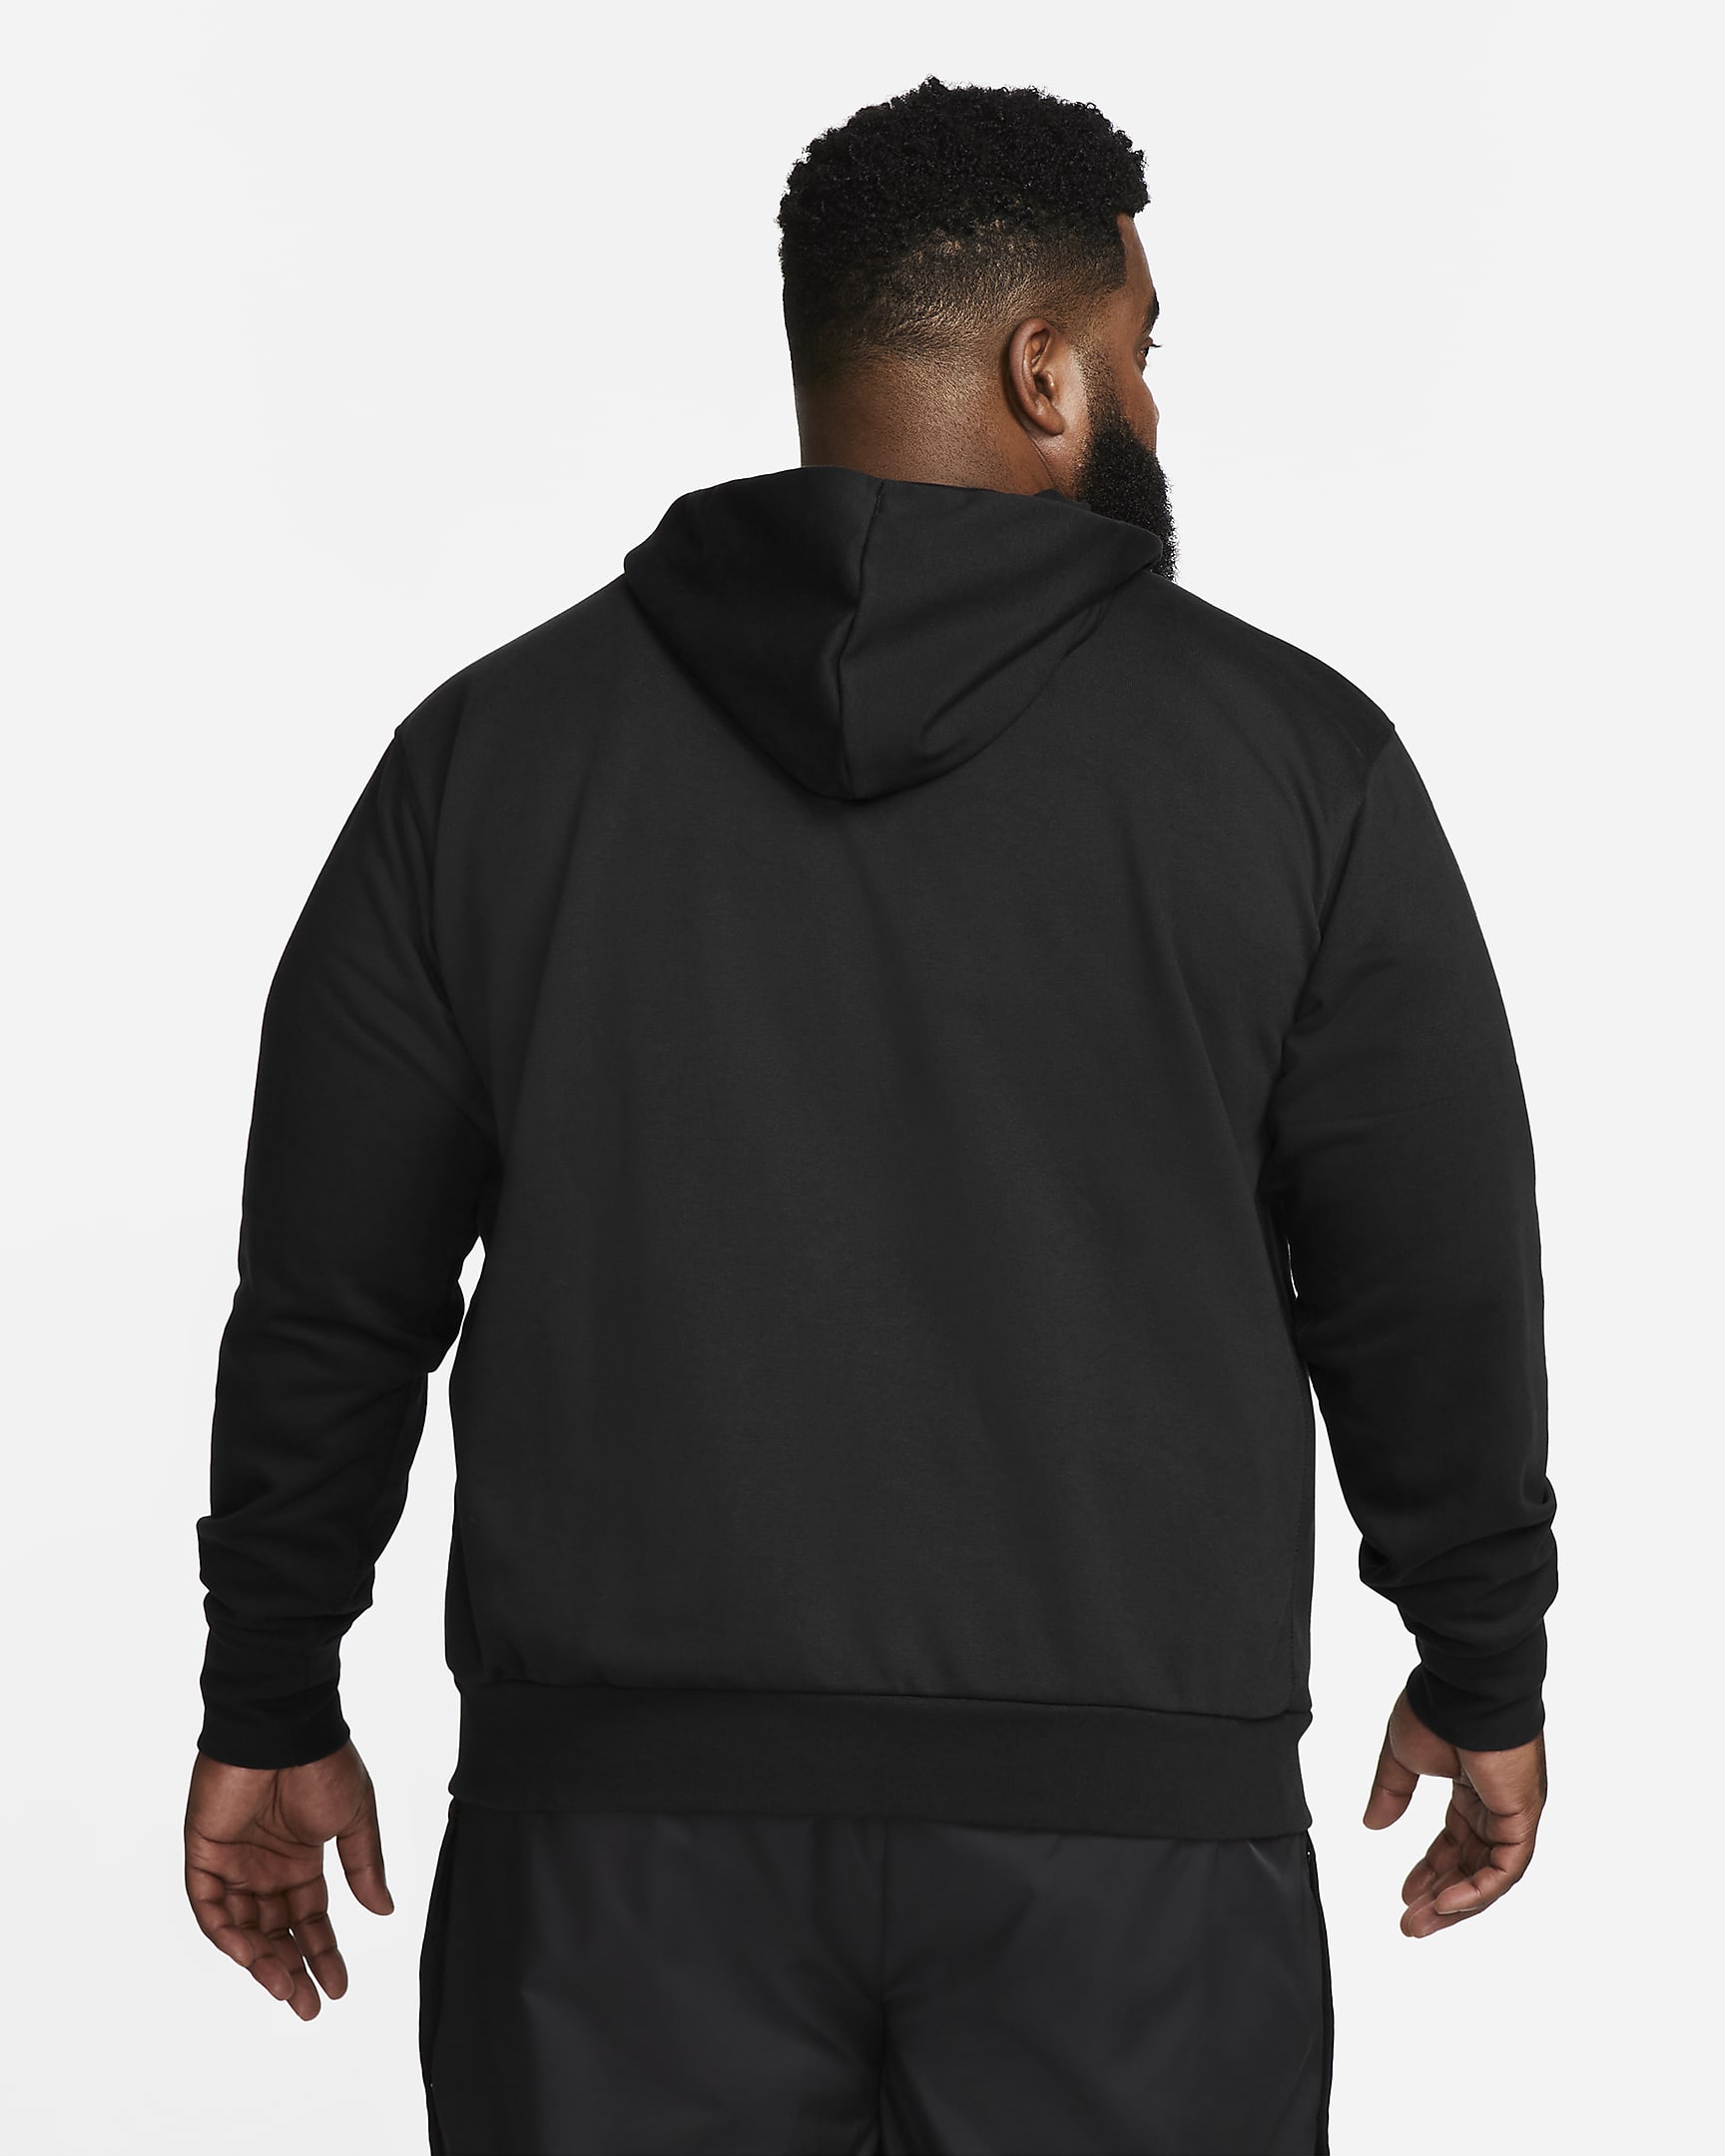 Nike Standard Issue Men's Dri-FIT Pullover Basketball Hoodie - Black/Pale Ivory